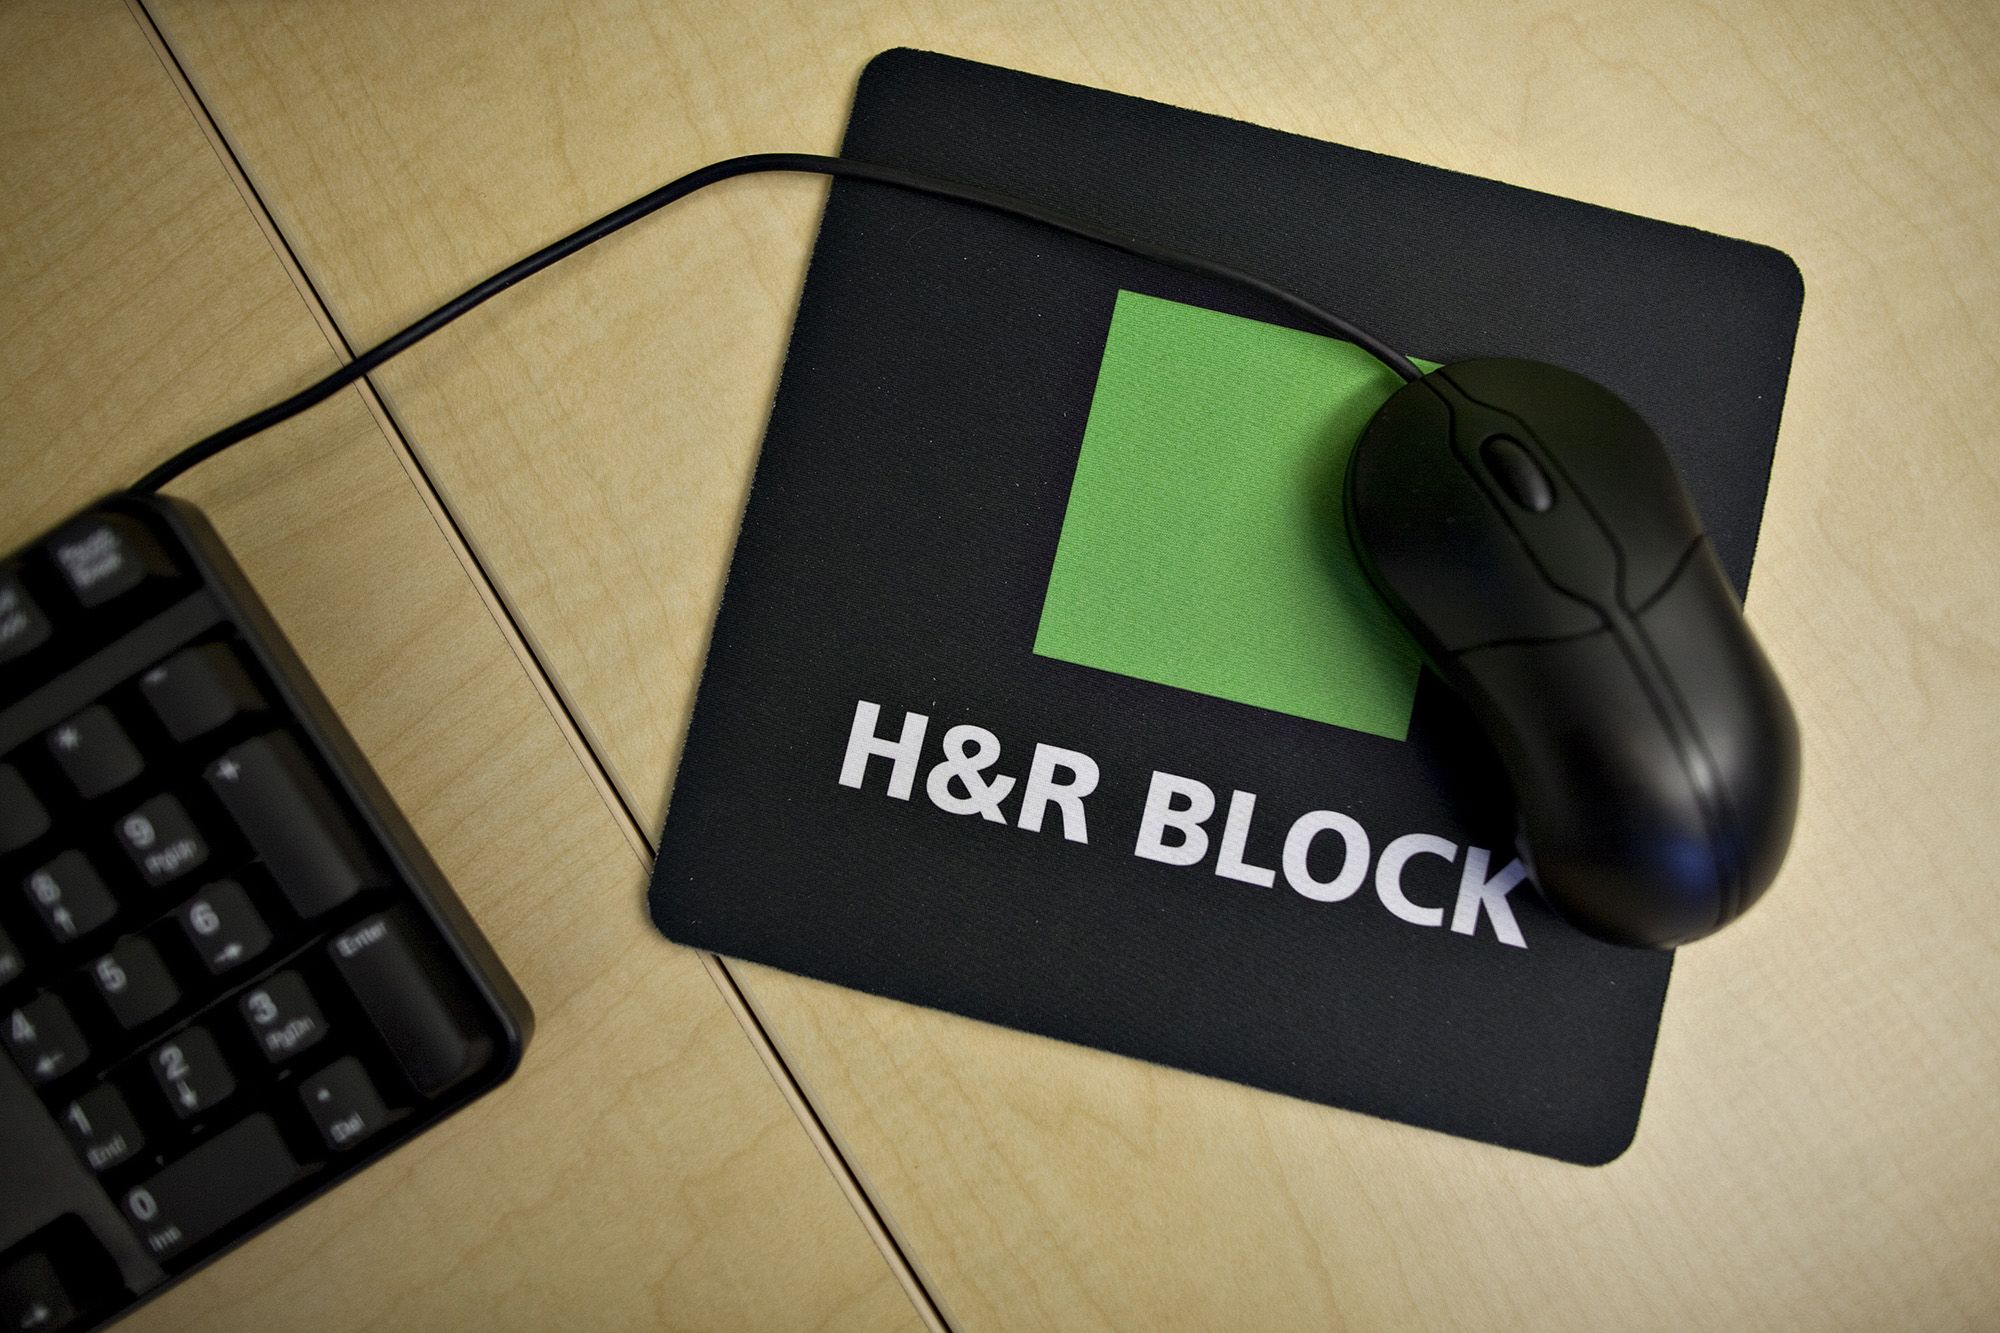 Some H&R Block customers faced hours of outages on Tax Day